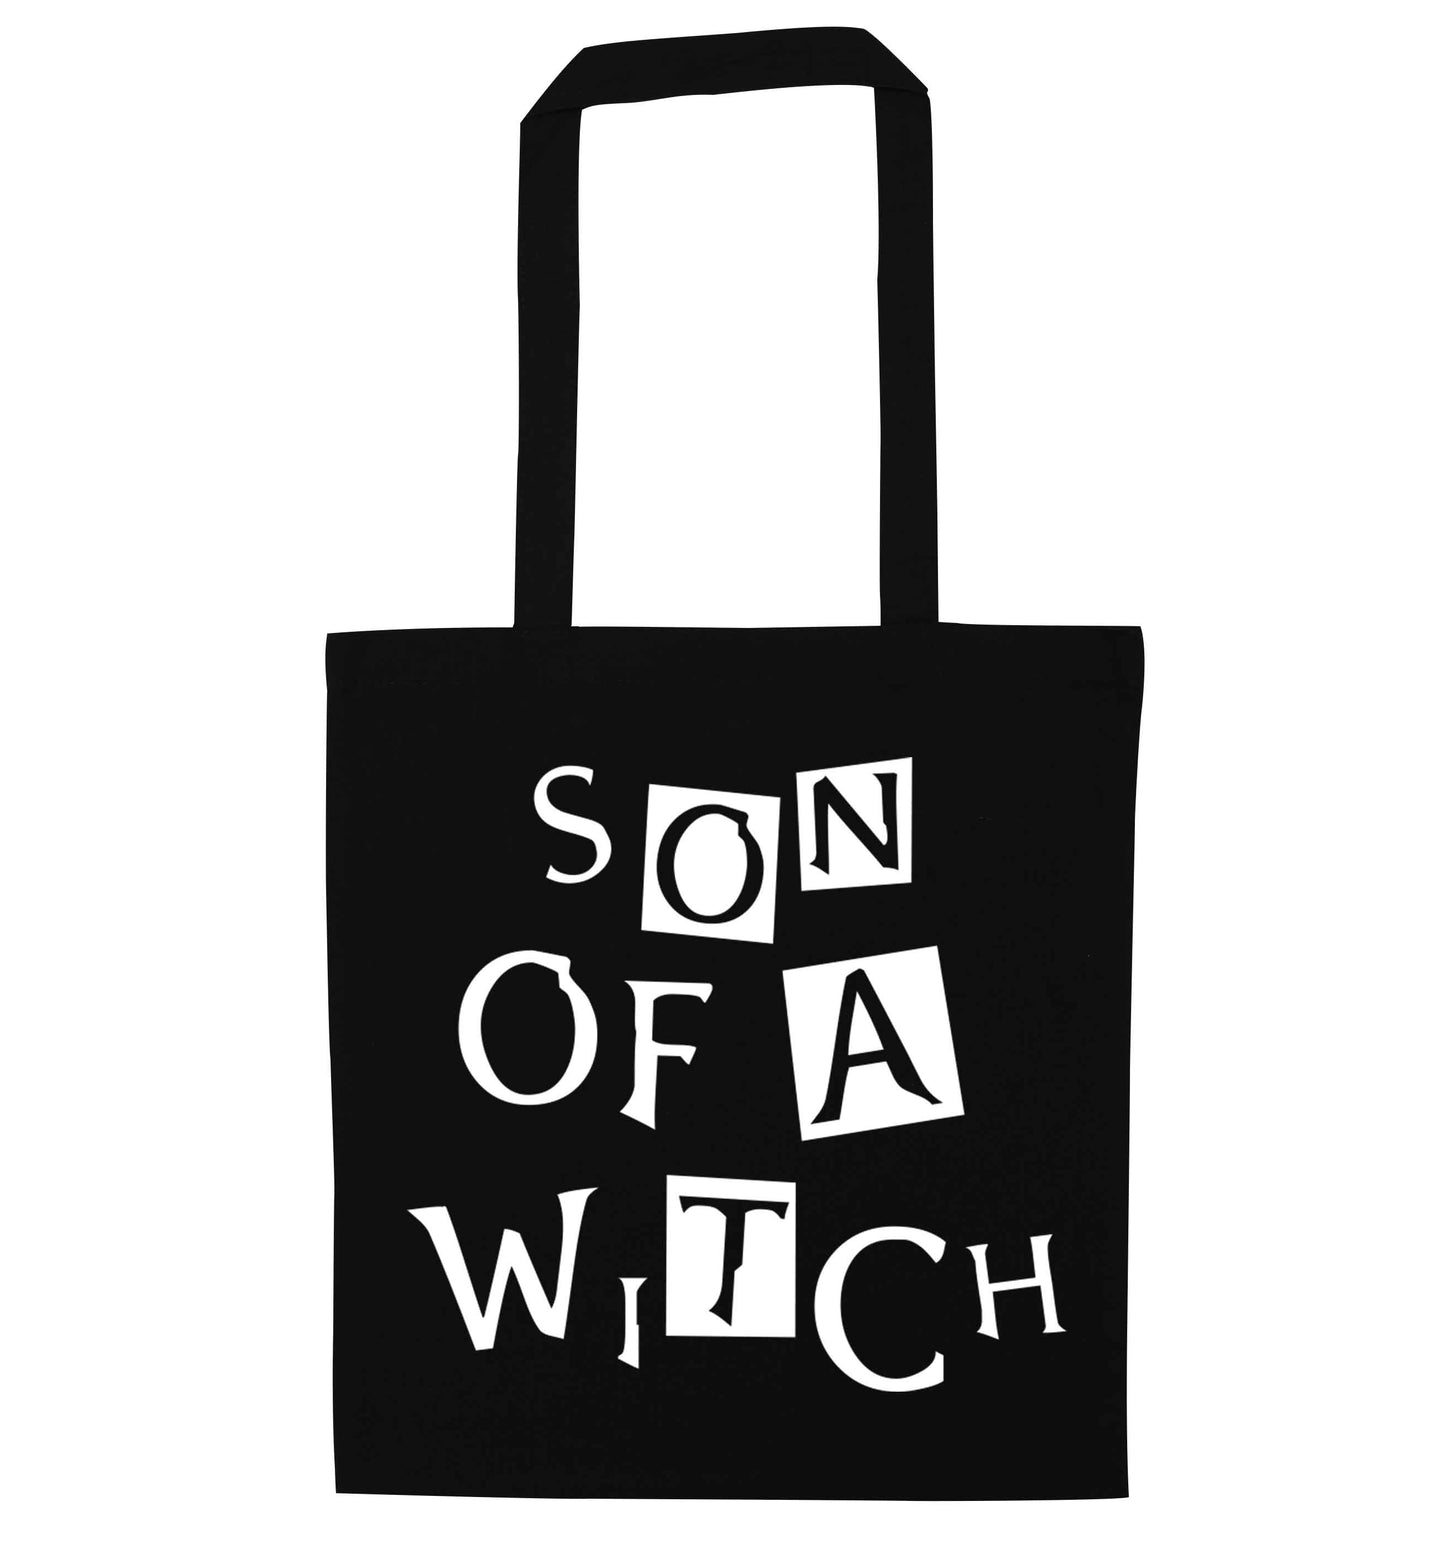 Son of a witch black tote bag